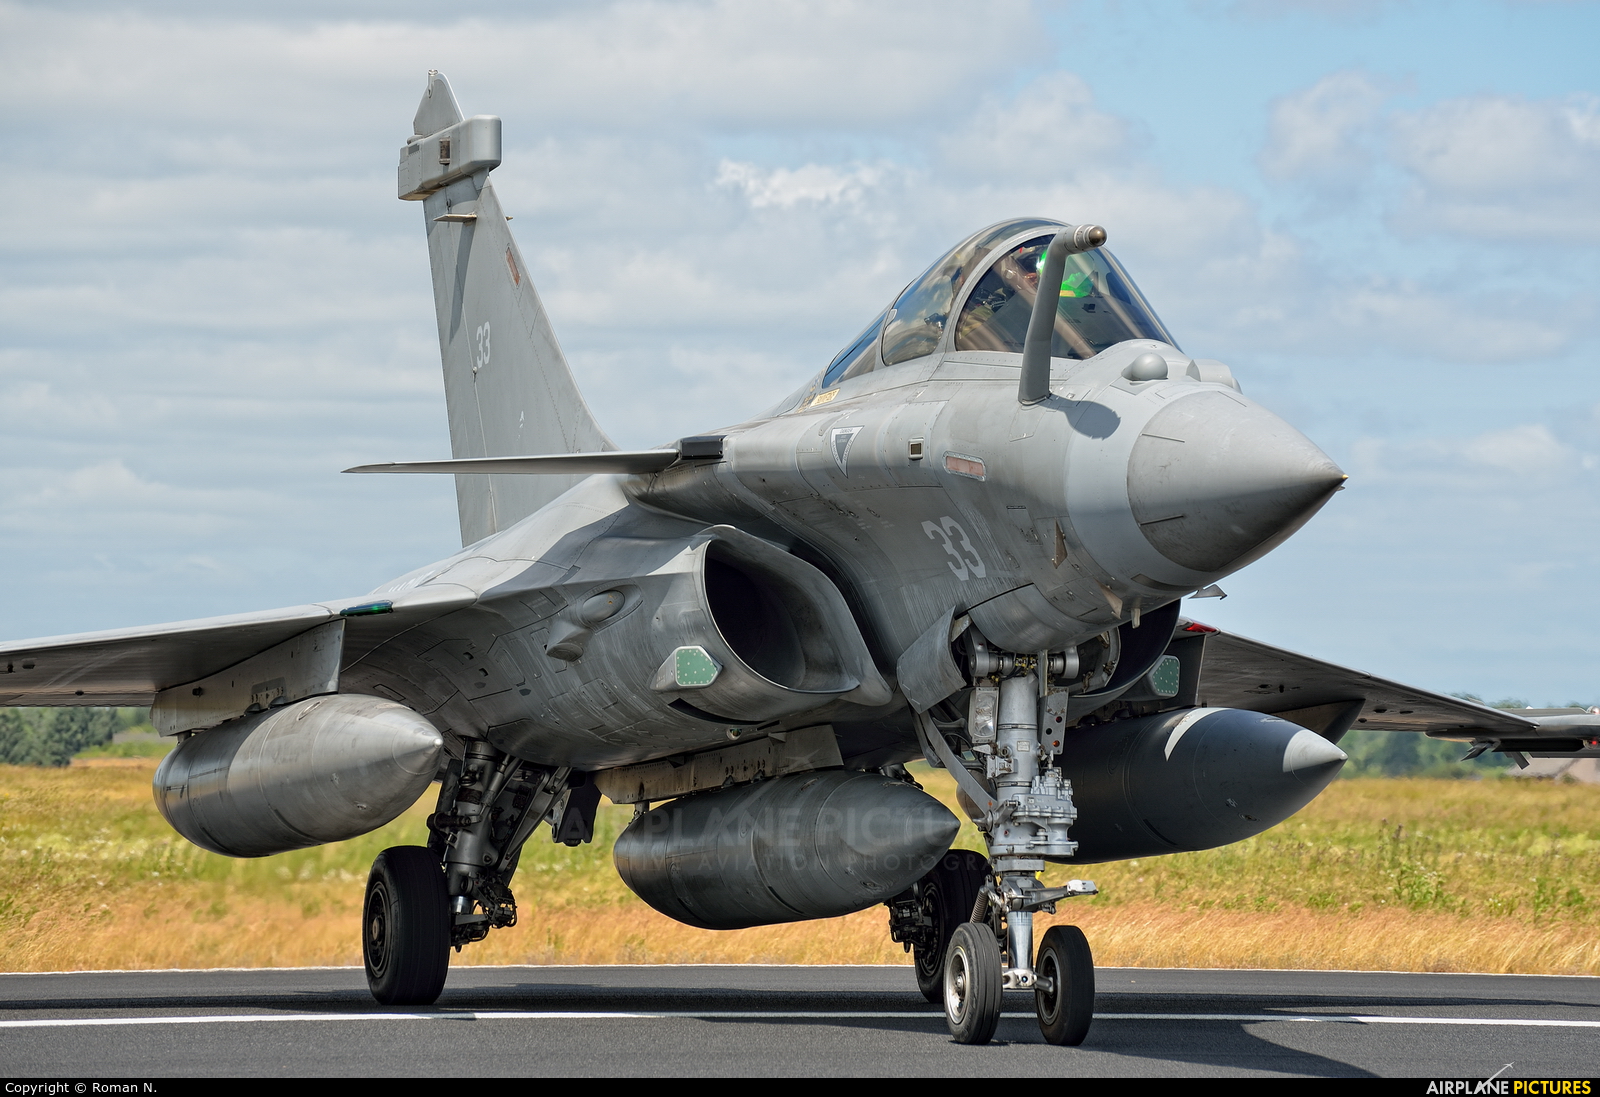        Dassualt's RAFALE-C Onmirole Strike Jet Fighter
The French have offered complete (100%) Transfer Of Technology for manufacture & the source code for the Active Electronic Scanned Array (AESA) Radar; if the RAFALE-C is selected by India for the MMRCA for the IAF 